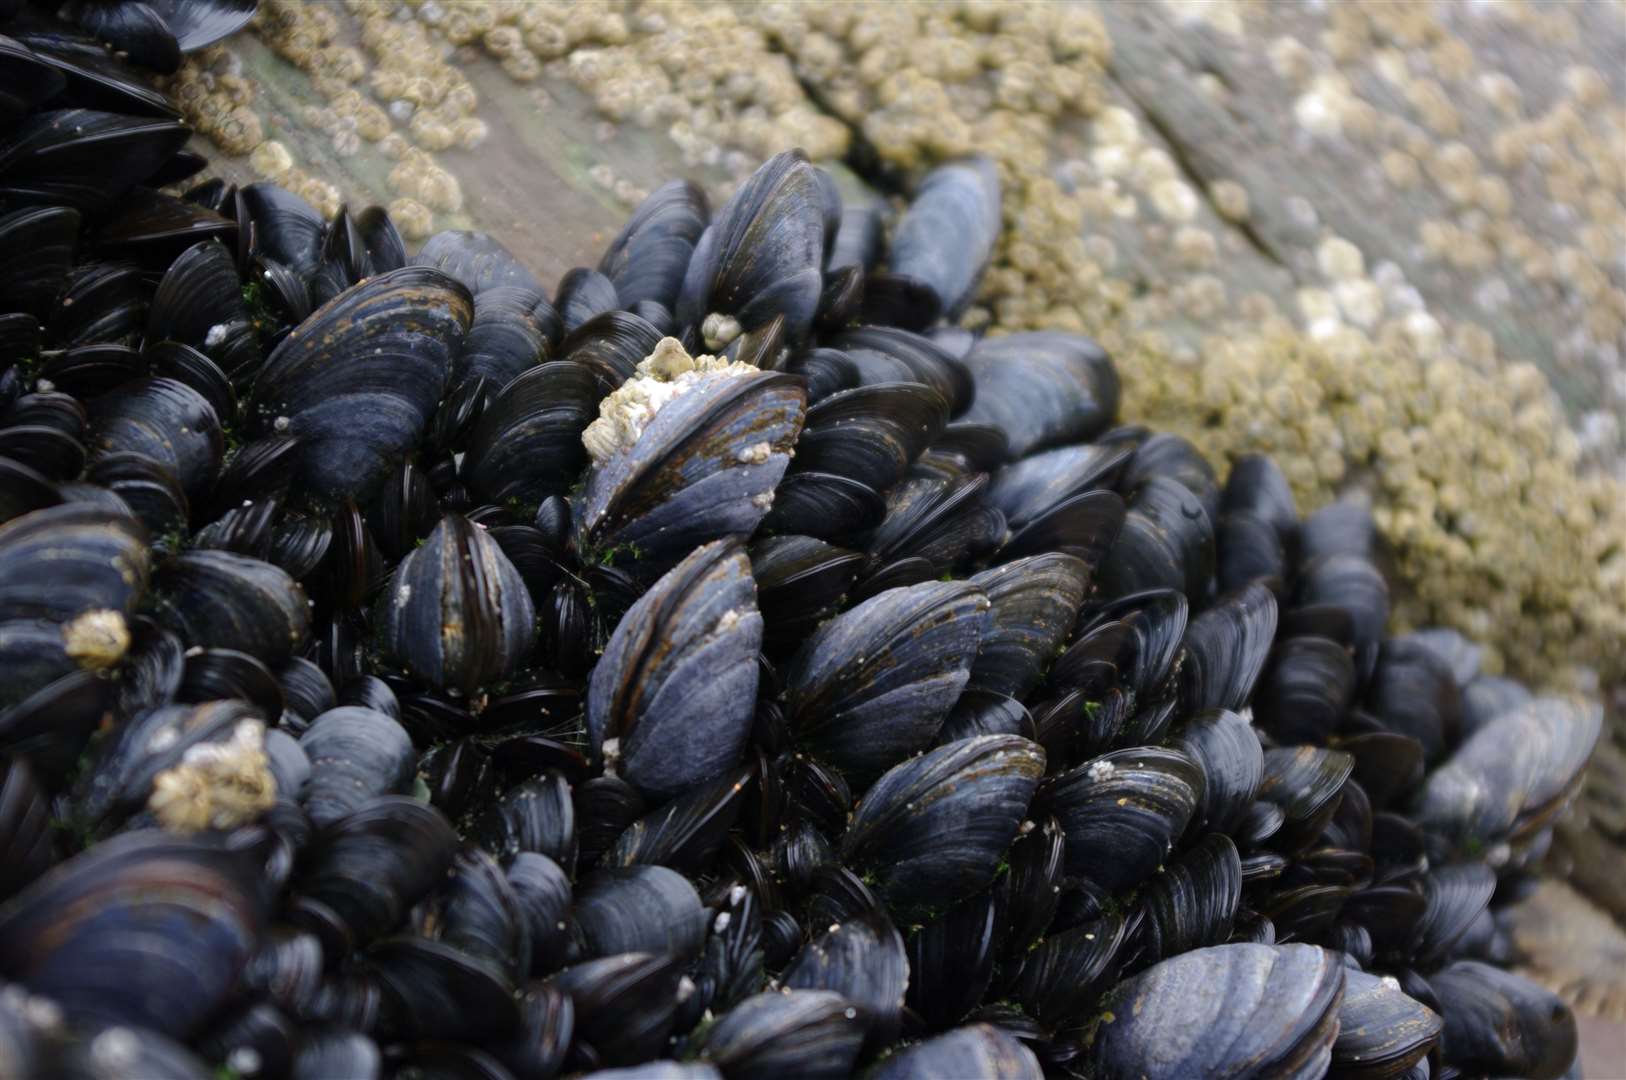 Mussels and other shellfish from Loch Glencoul should not be eaten until further notice